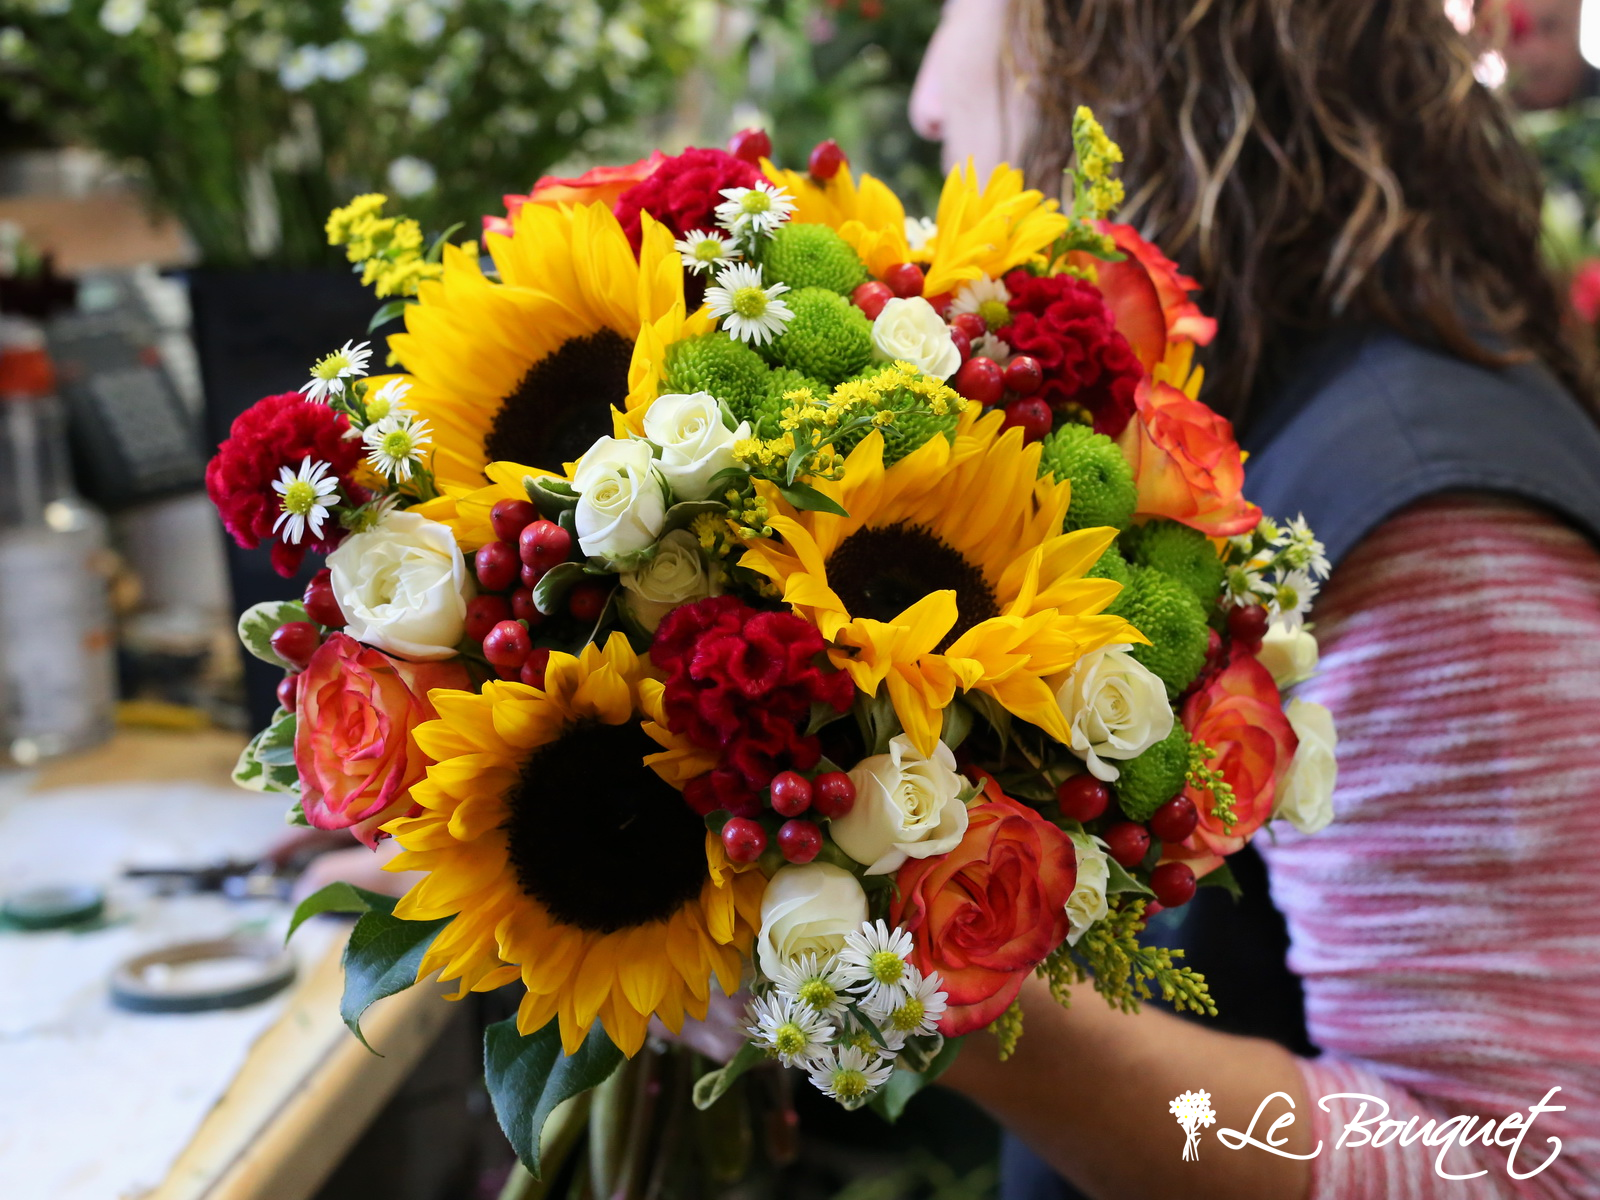 Harvest the Warmth of  Autumn with Radiant Bouquets and Decor